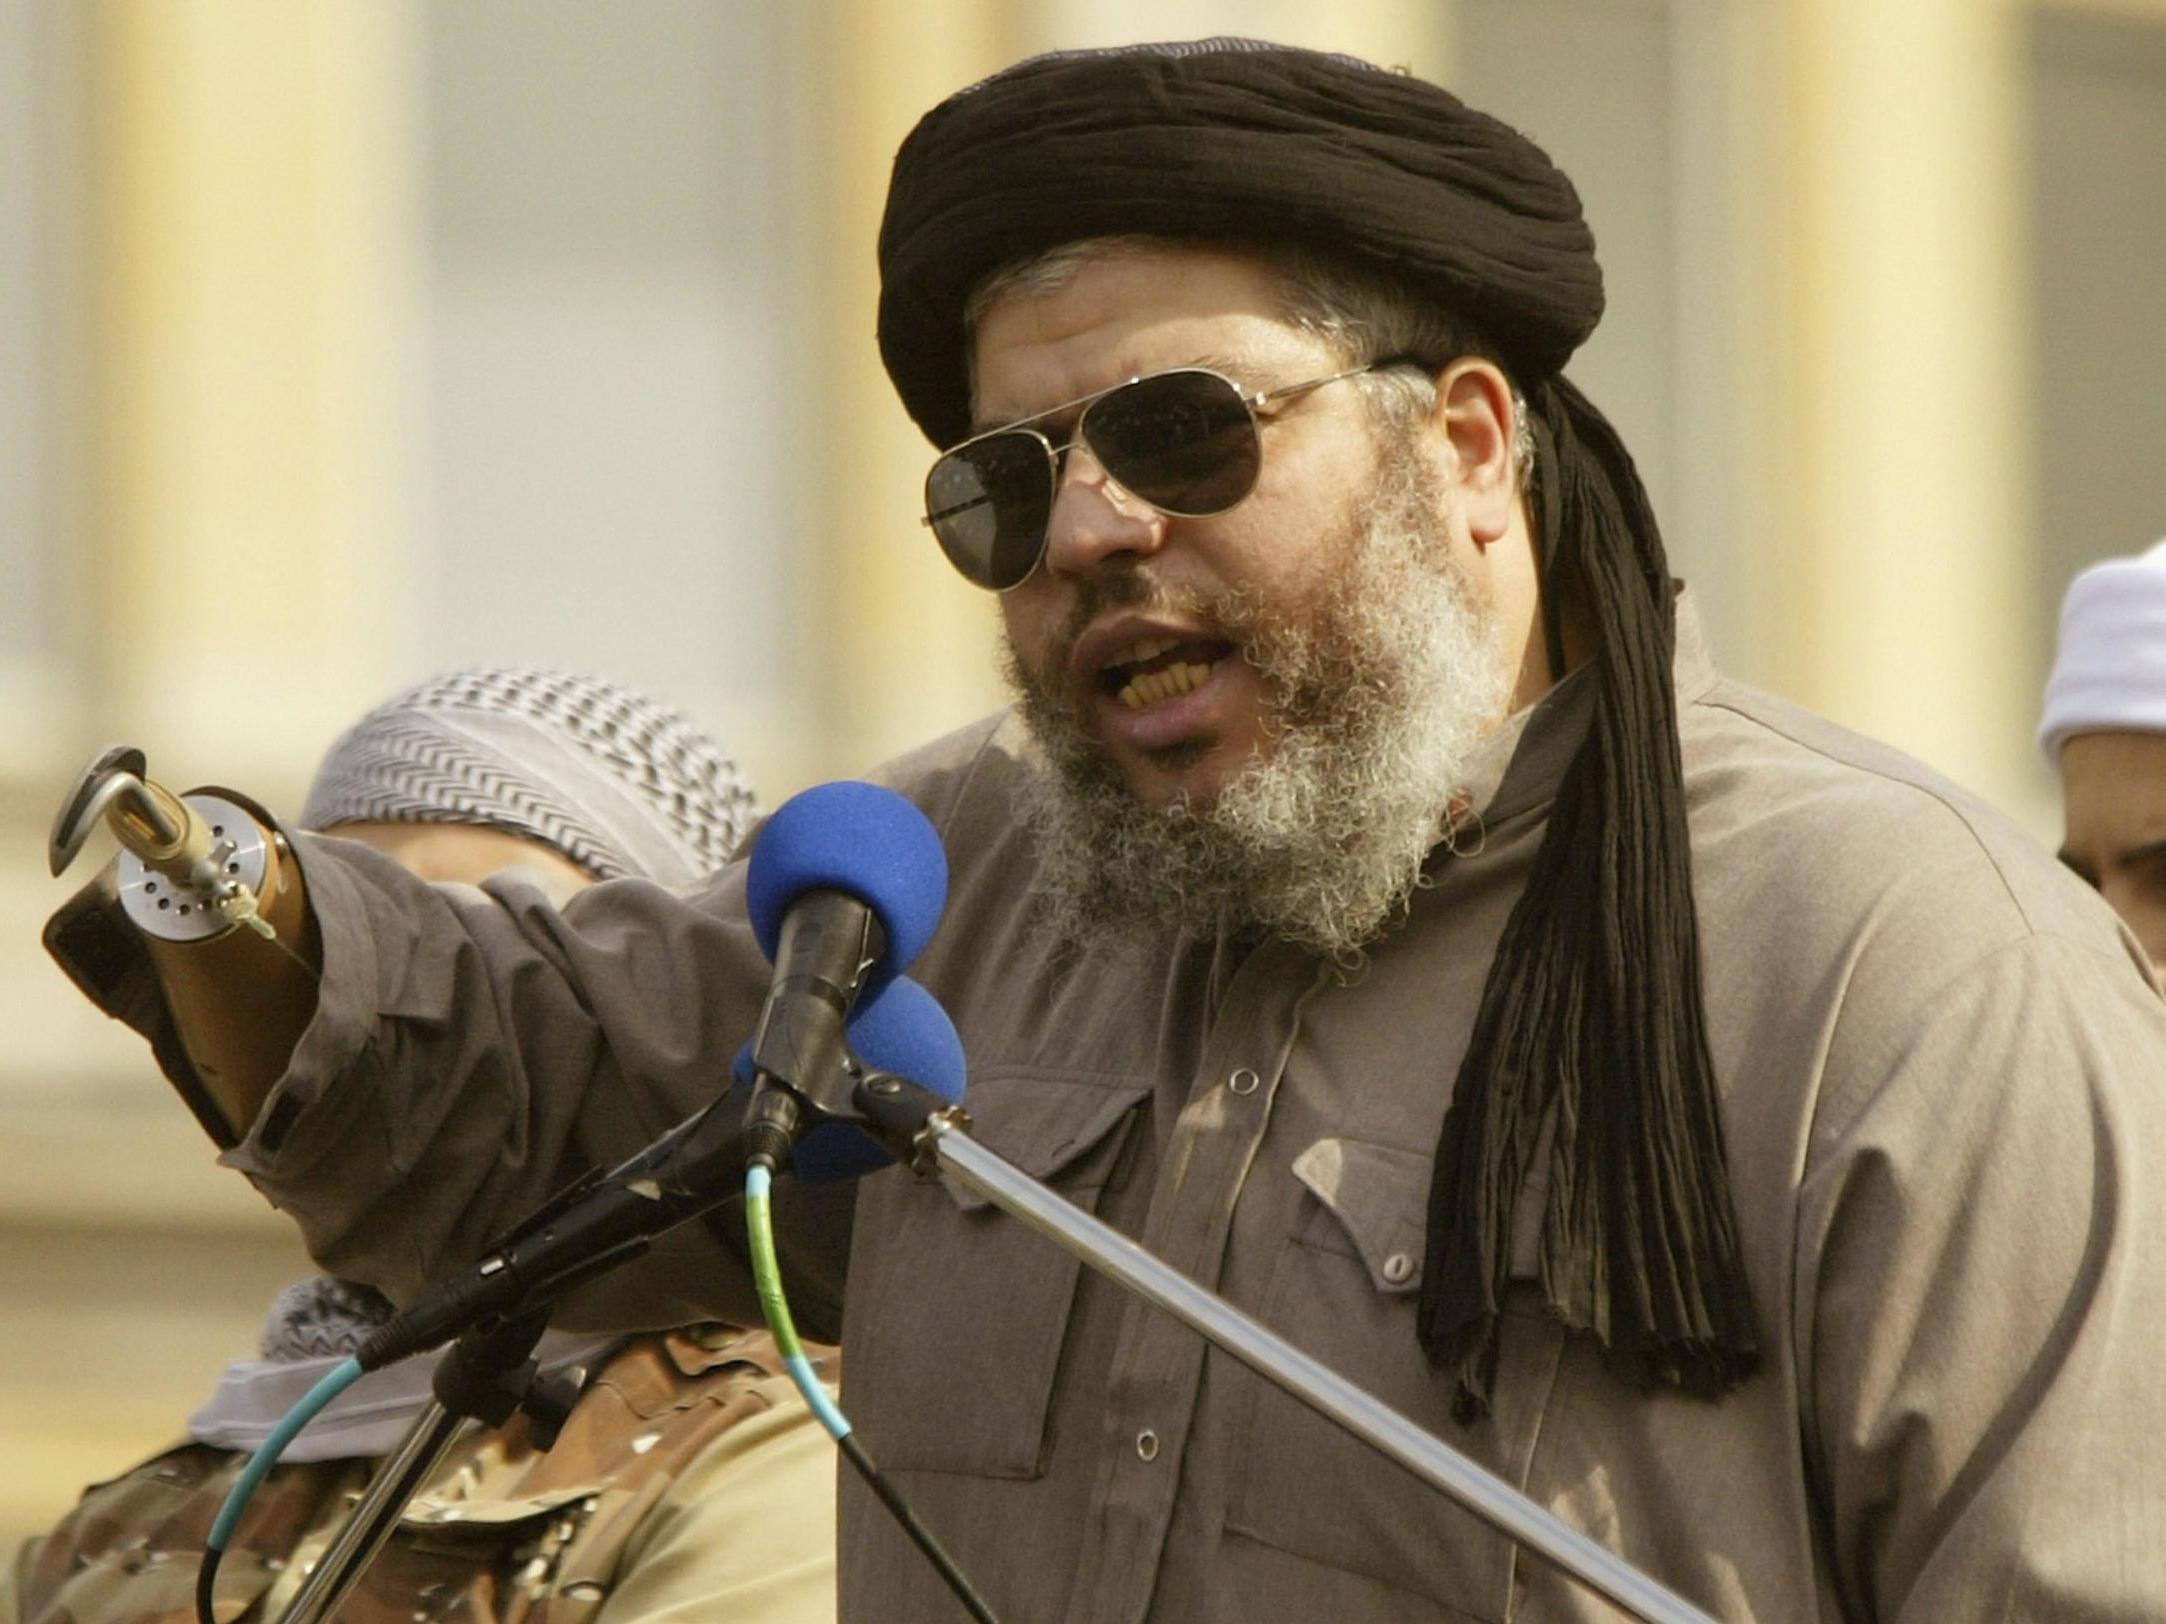 Abu Hamza sues US over 'cruel' prison conditions as he claims his hooks which replace forearms have been removed